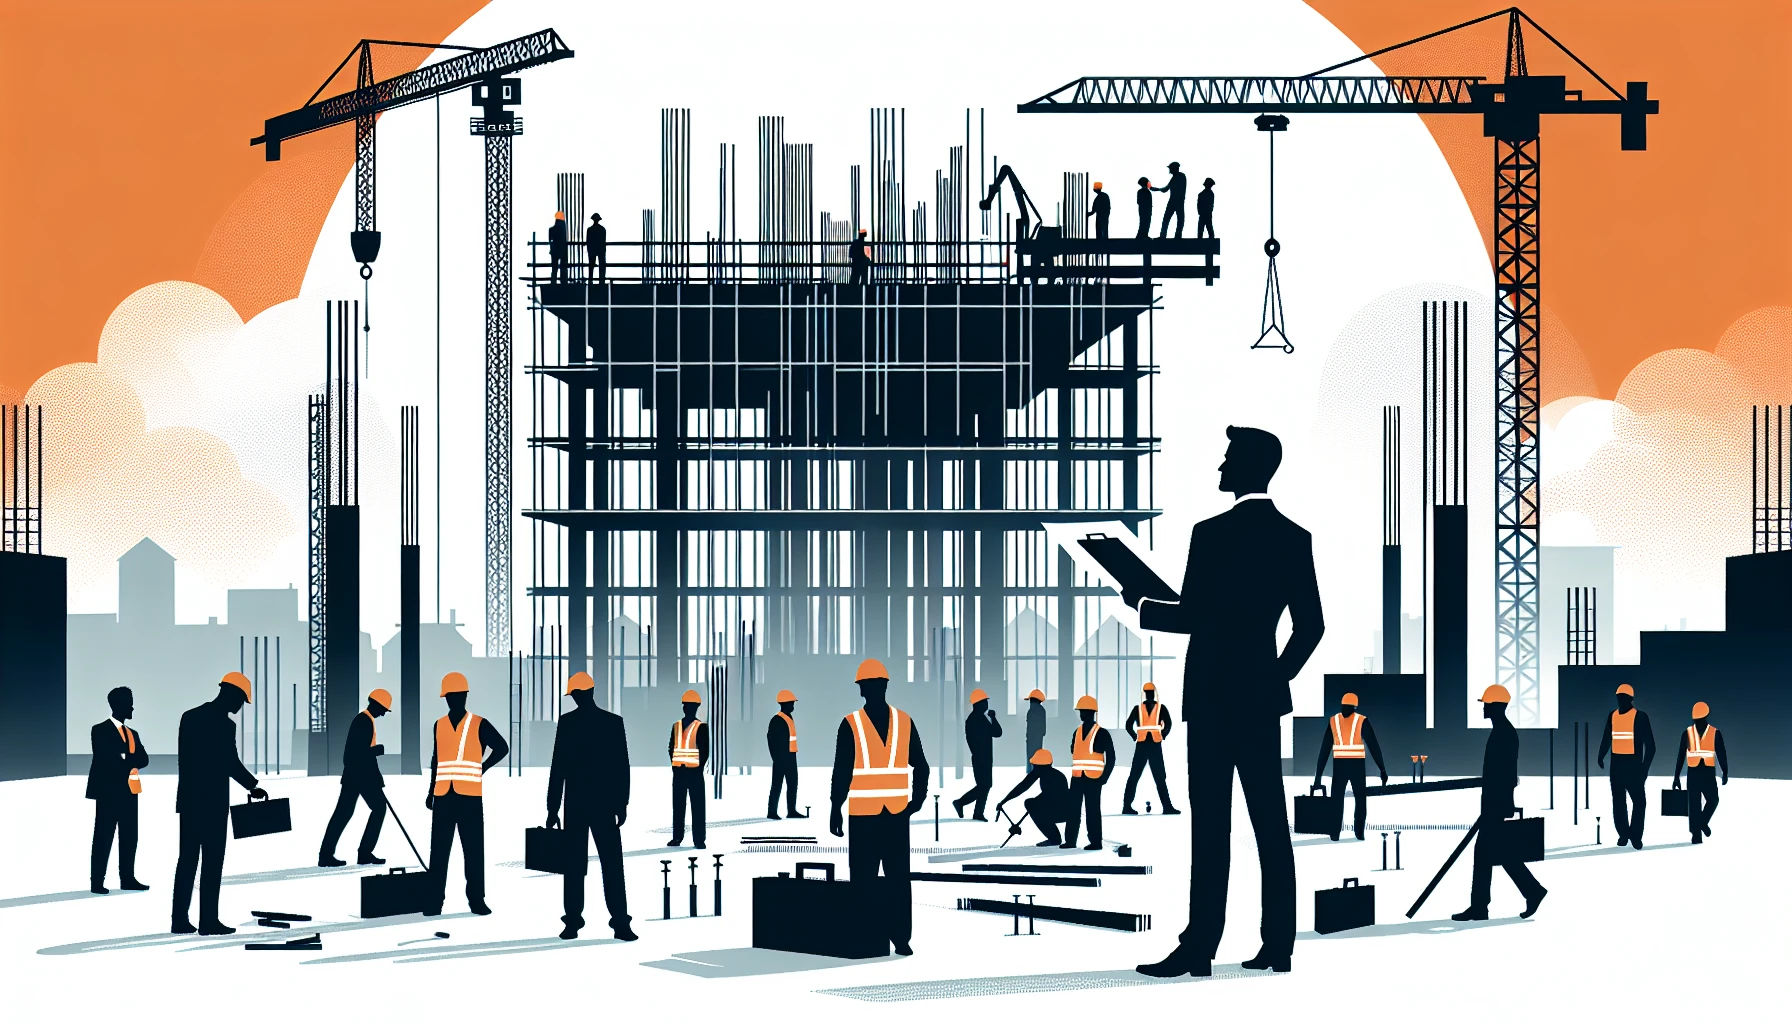 Building and construction management illustration with manager and workers on site